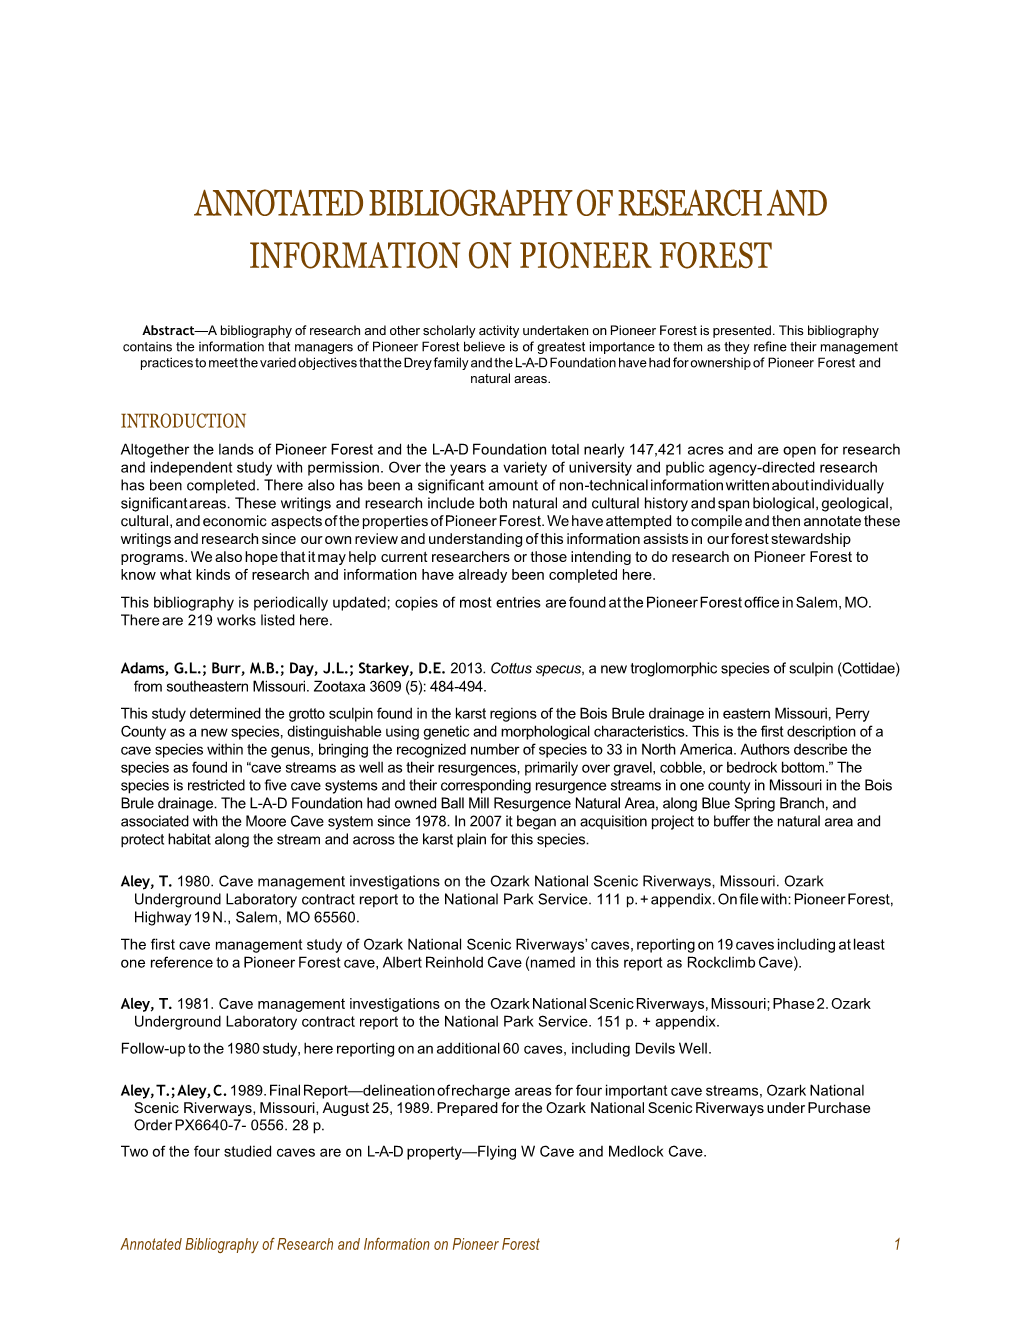 Annotated Bibliography of Research and Information on Pioneer Forest